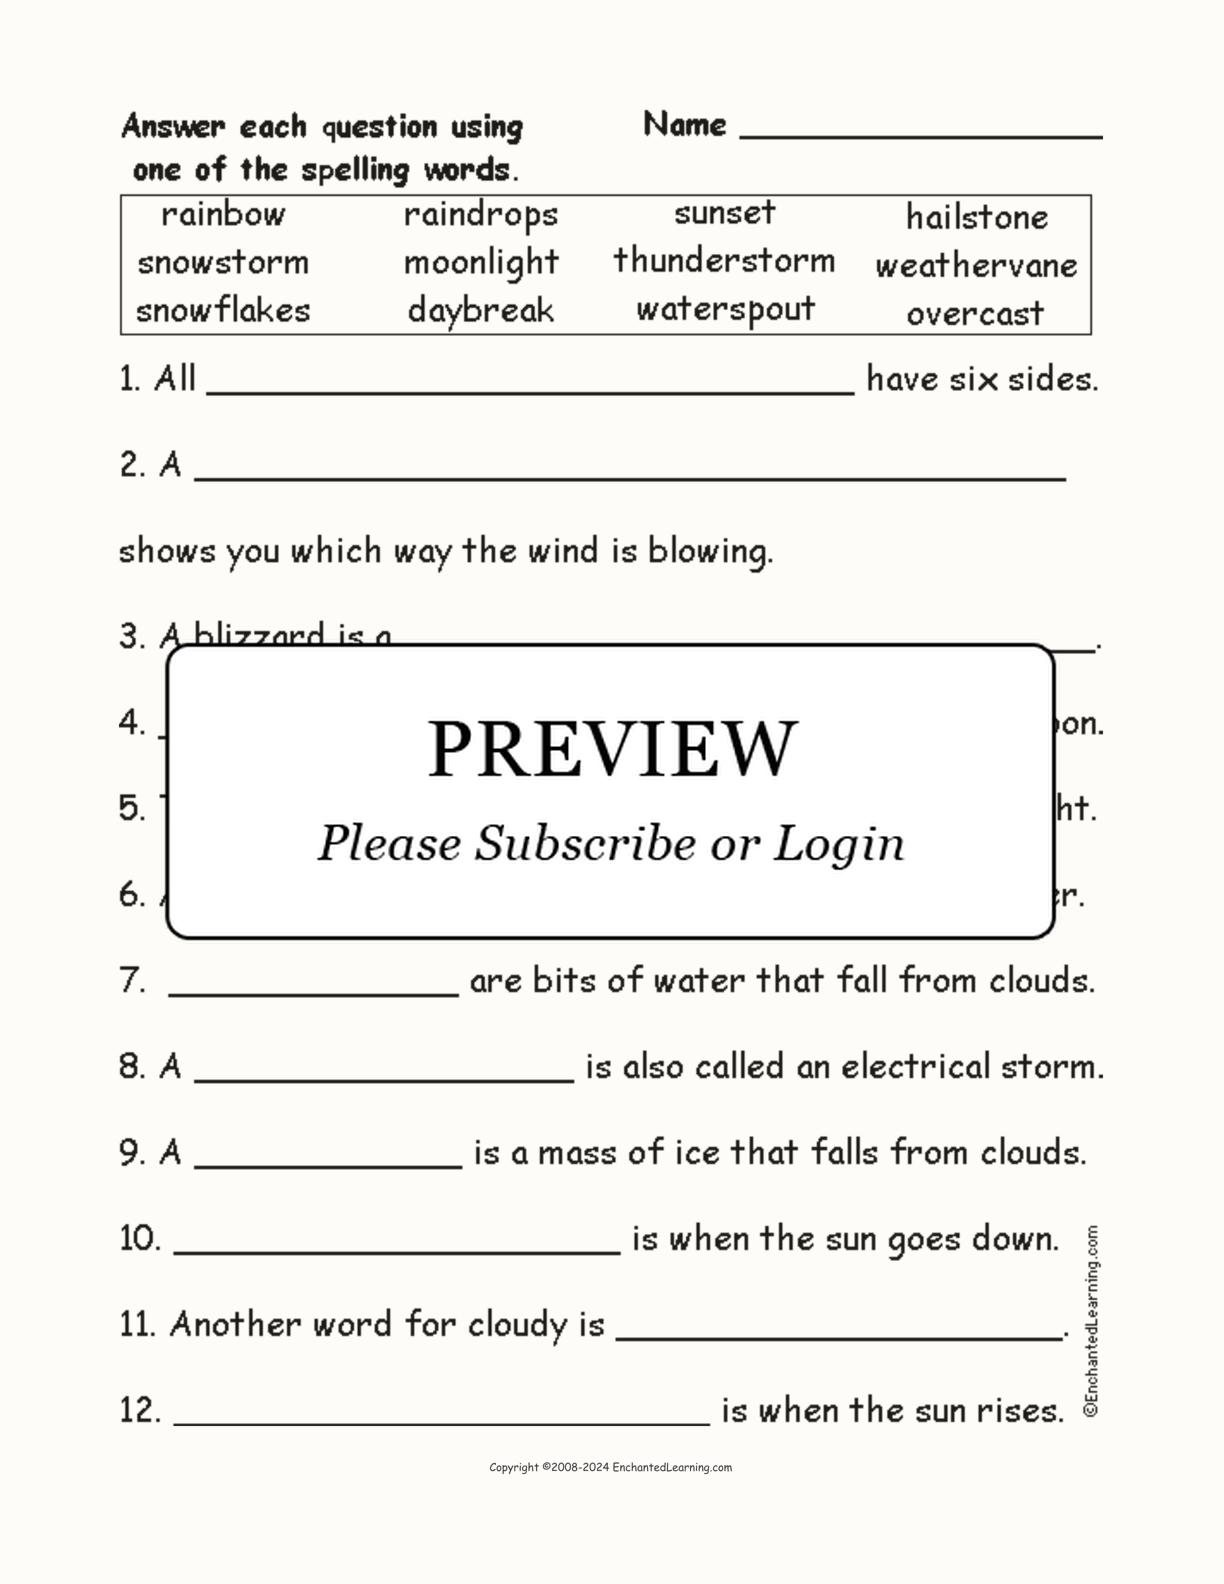 Compound Weather Words: Spelling Questions interactive worksheet page 1